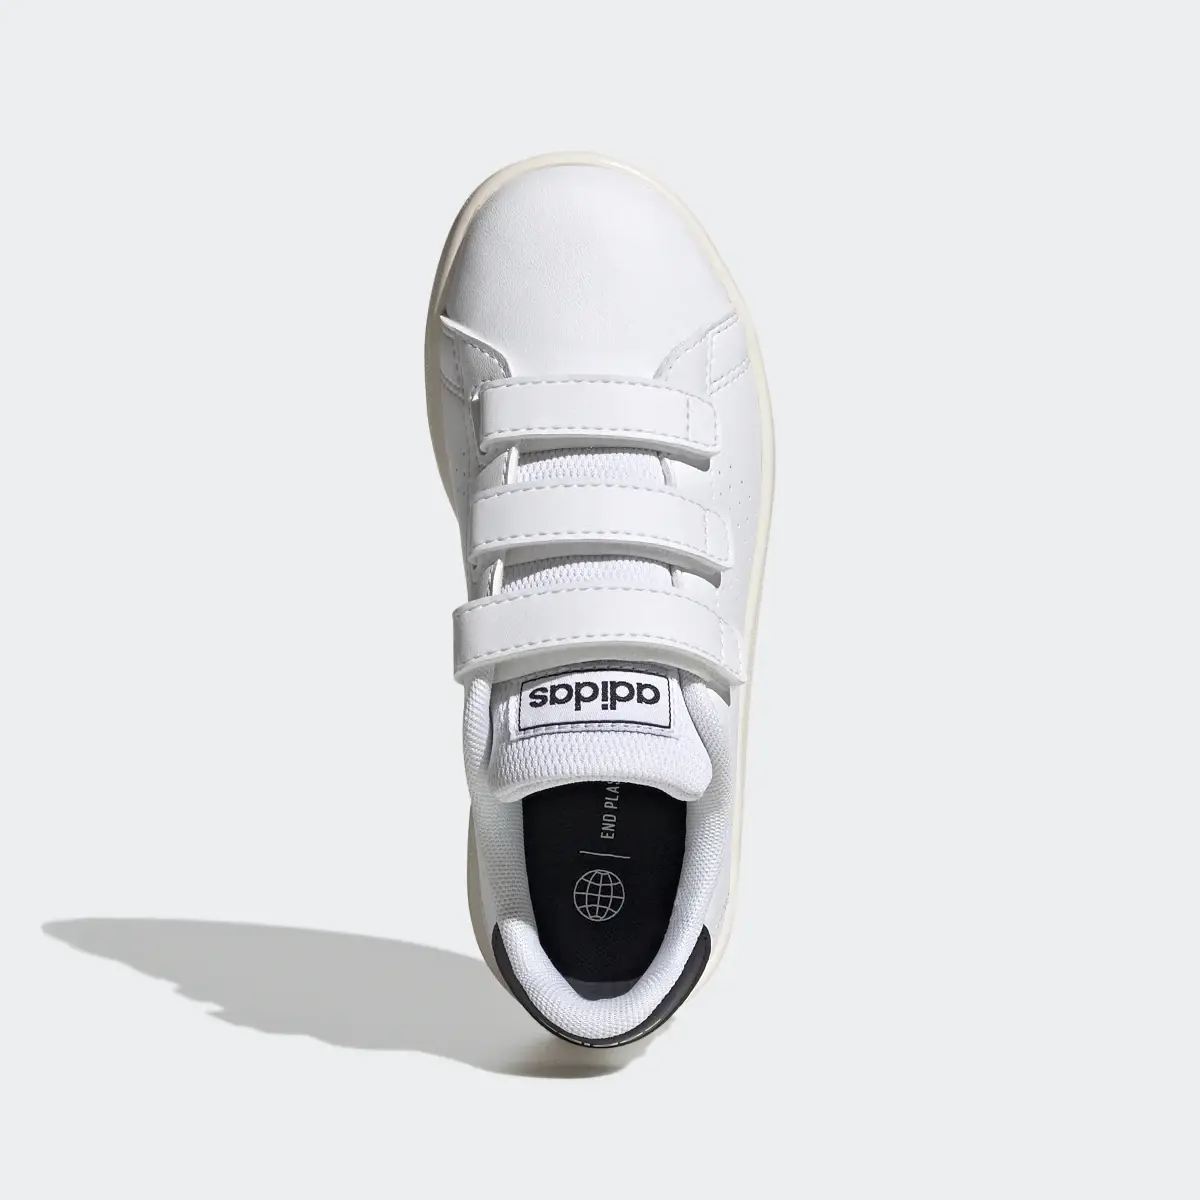 Adidas Advantage Court Lifestyle Hook-and-Loop Shoes. 3